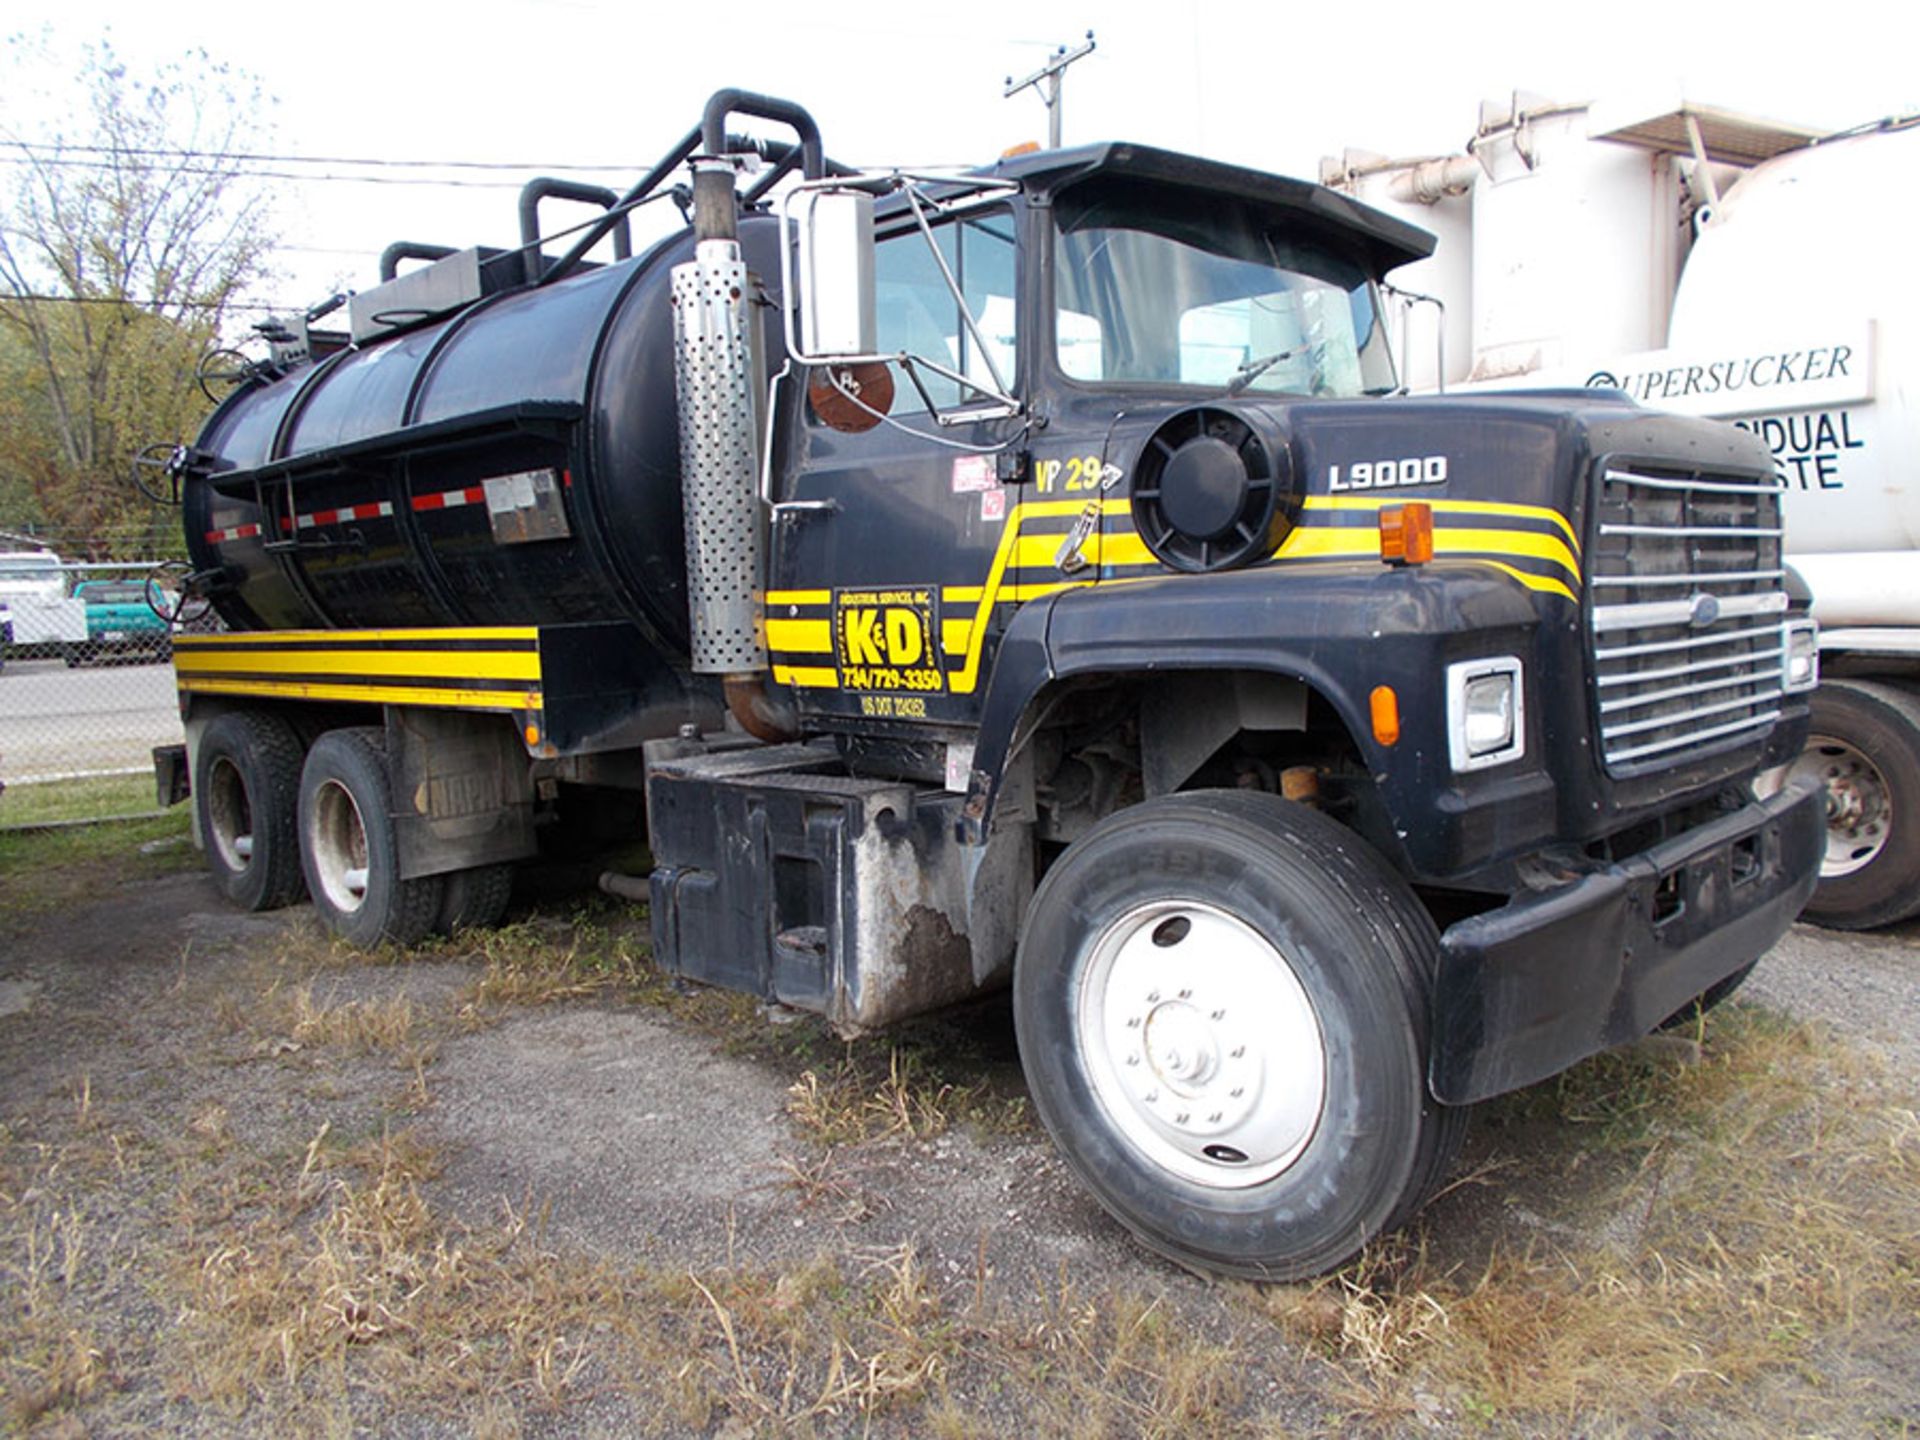 1990 FORD L9000 VACUUM PUMPER; 491,080 MILES, VIN 1FDYW90X5LVA12747, CAT DIESEL, WITH PREVAC SYSTEMS - Image 2 of 4